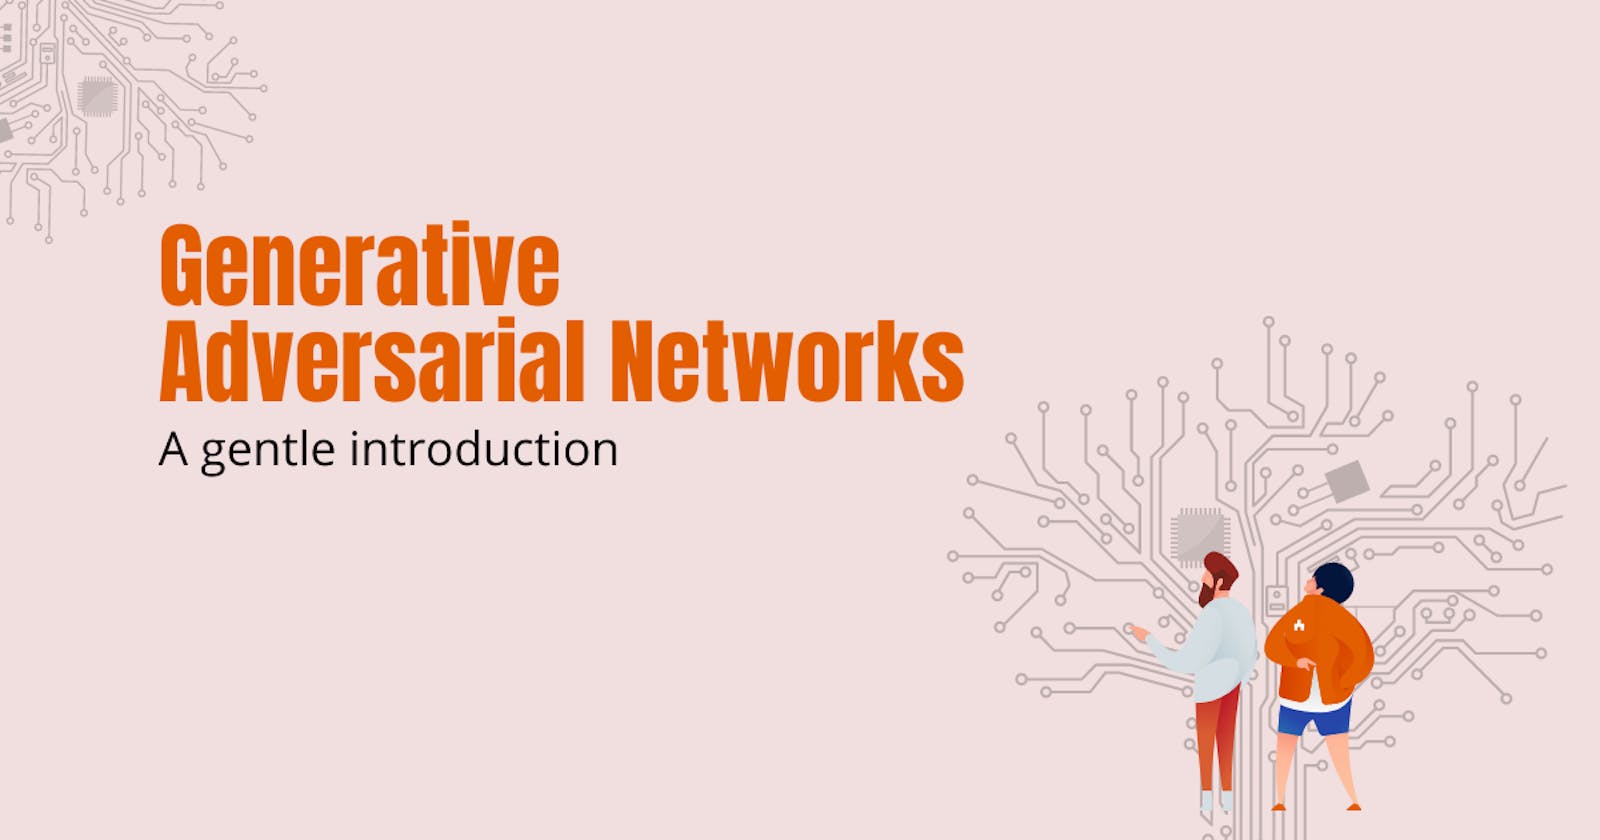 "Demystifying Generative Adversarial Networks: An Introduction to AI's Creative Power"